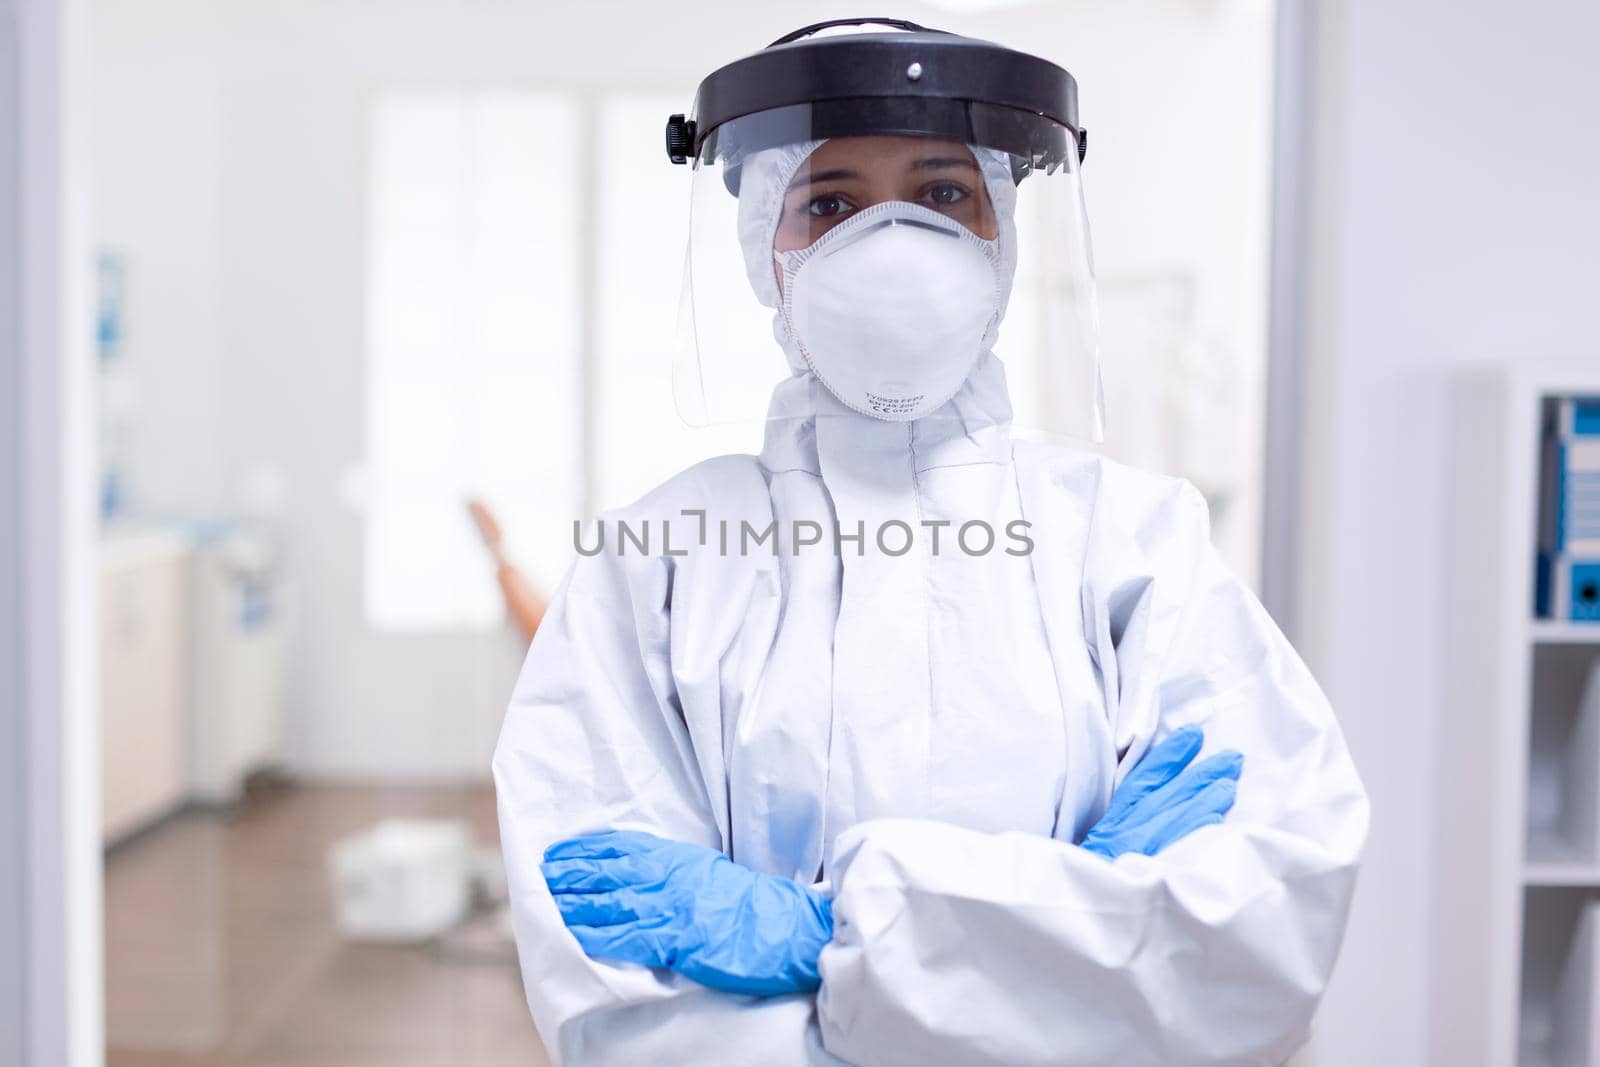 Stressed doctor with arms crossed in hazmat suit during coronavirus outbreak. Medical personal dressed in protection equipment against infection with covid-19 during global pandemic.